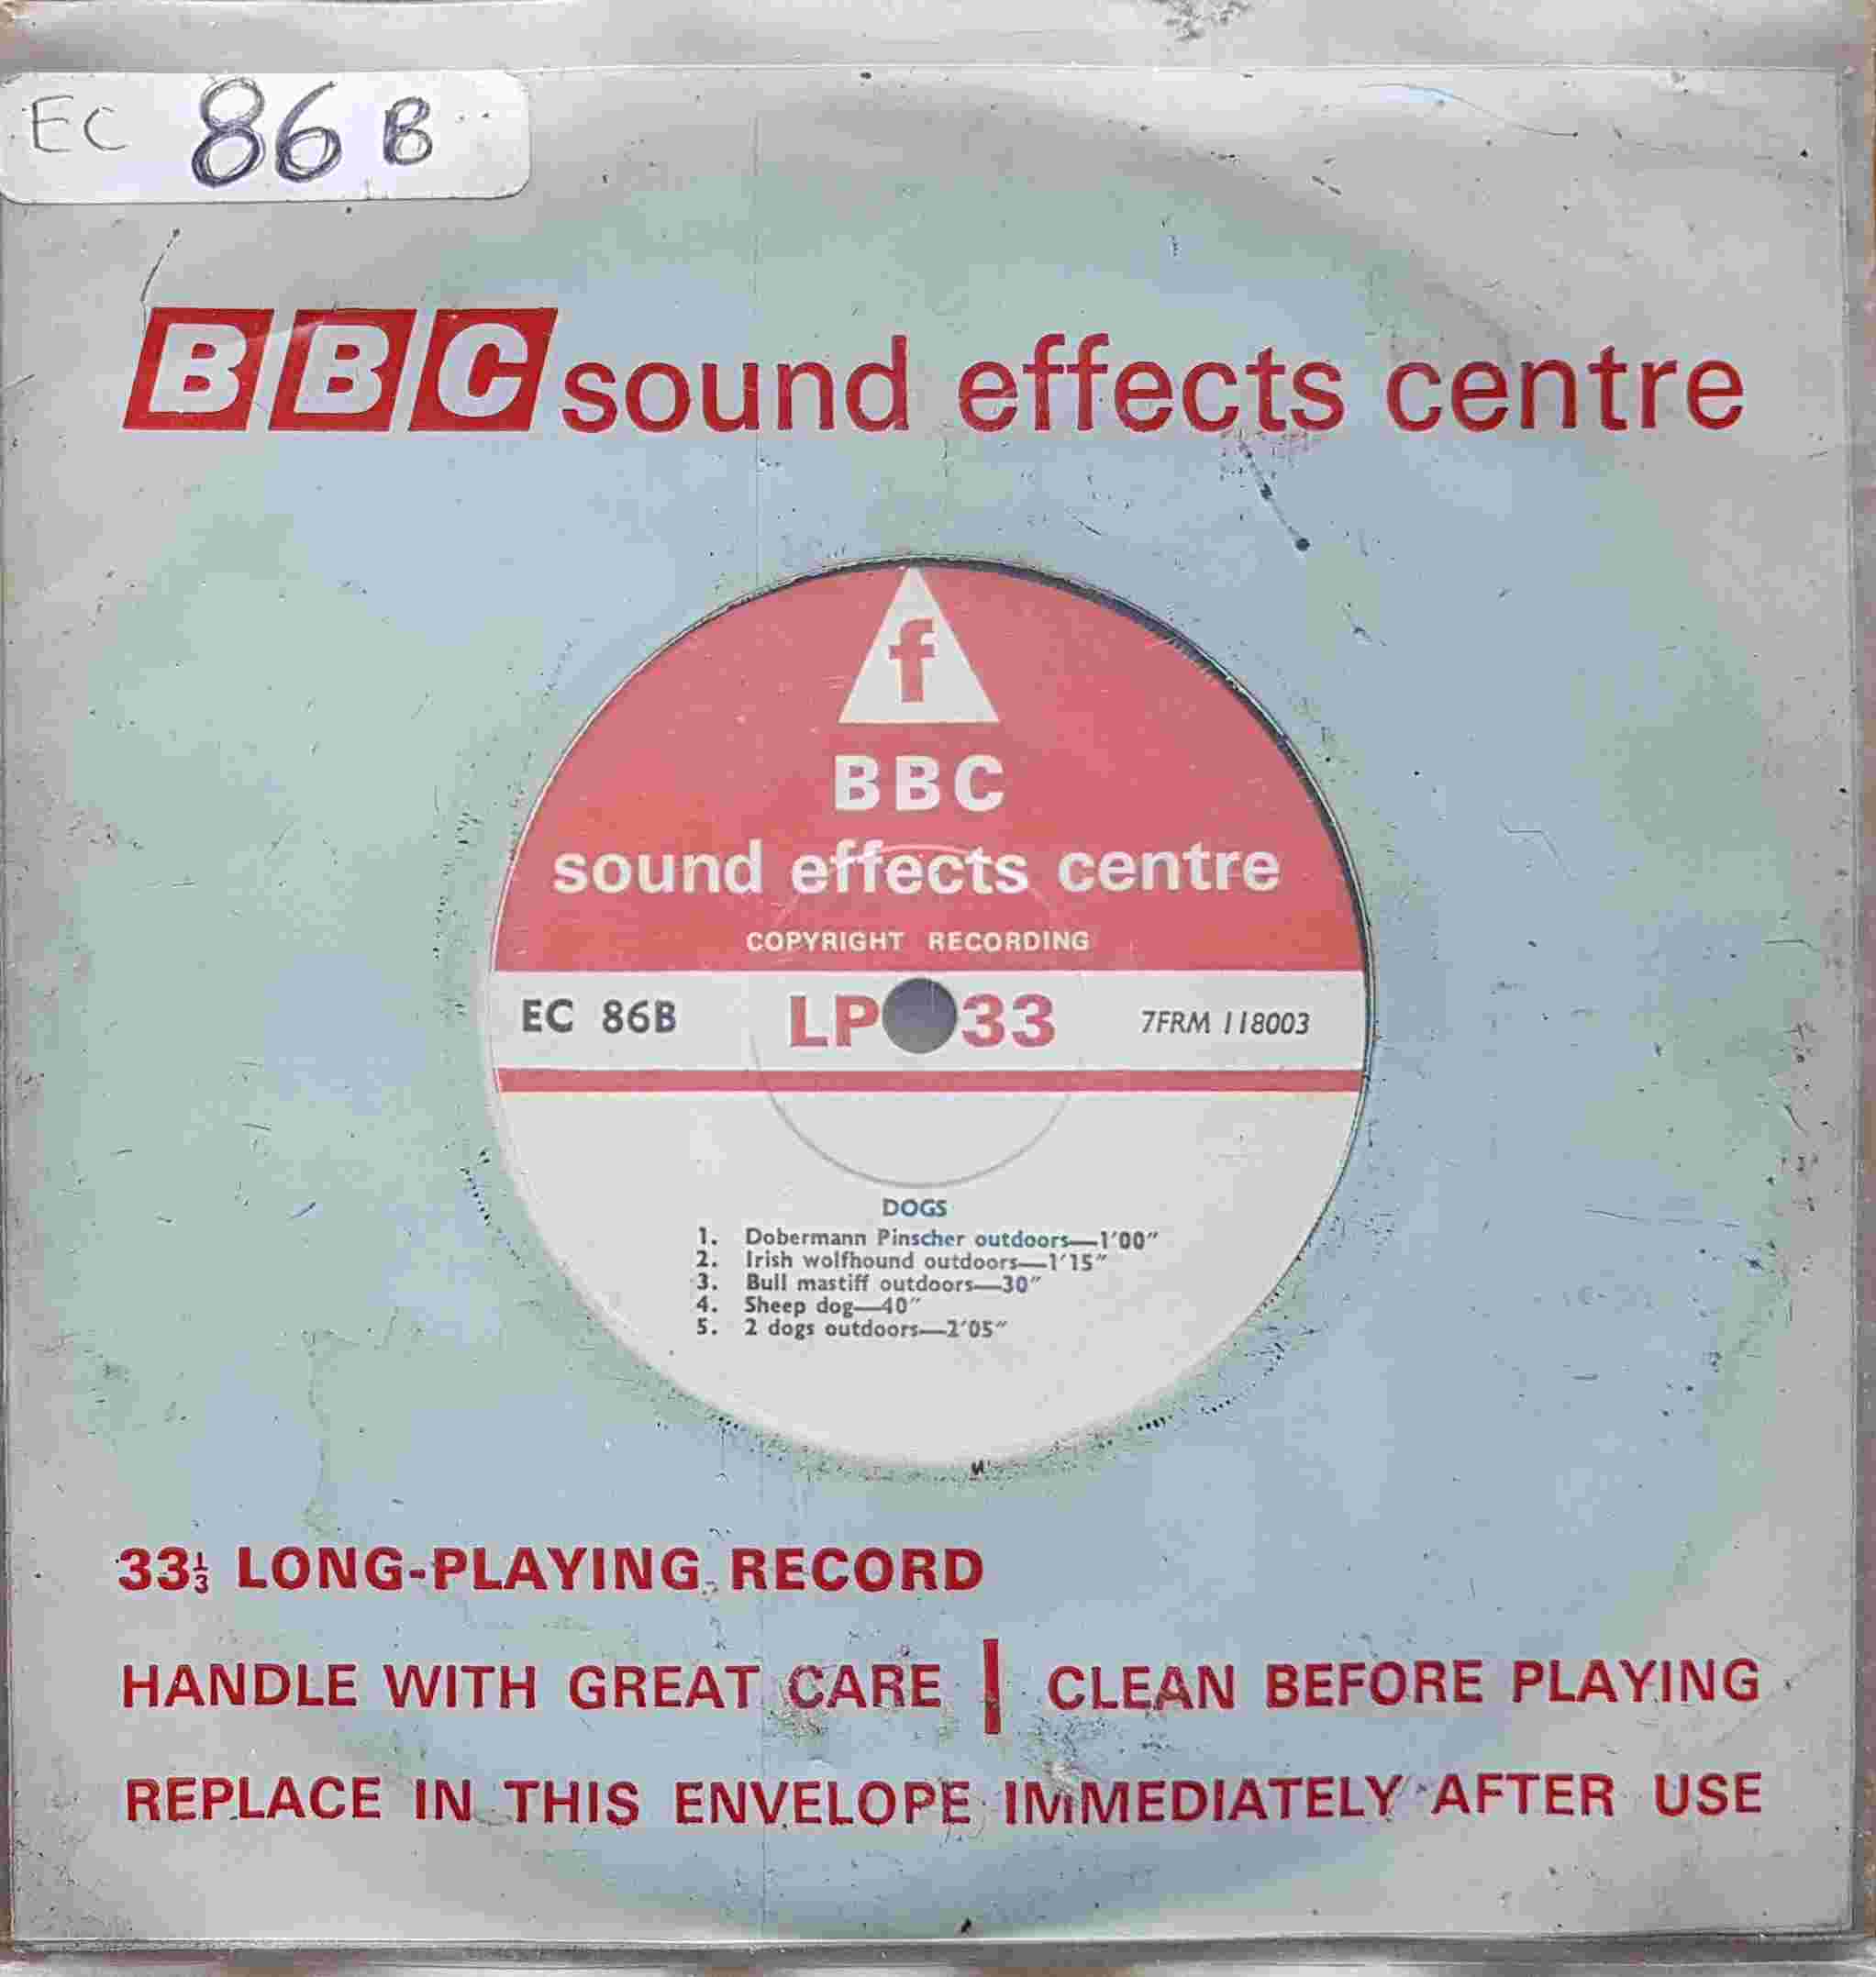 Picture of EC 86B Dogs by artist Not registered from the BBC singles - Records and Tapes library